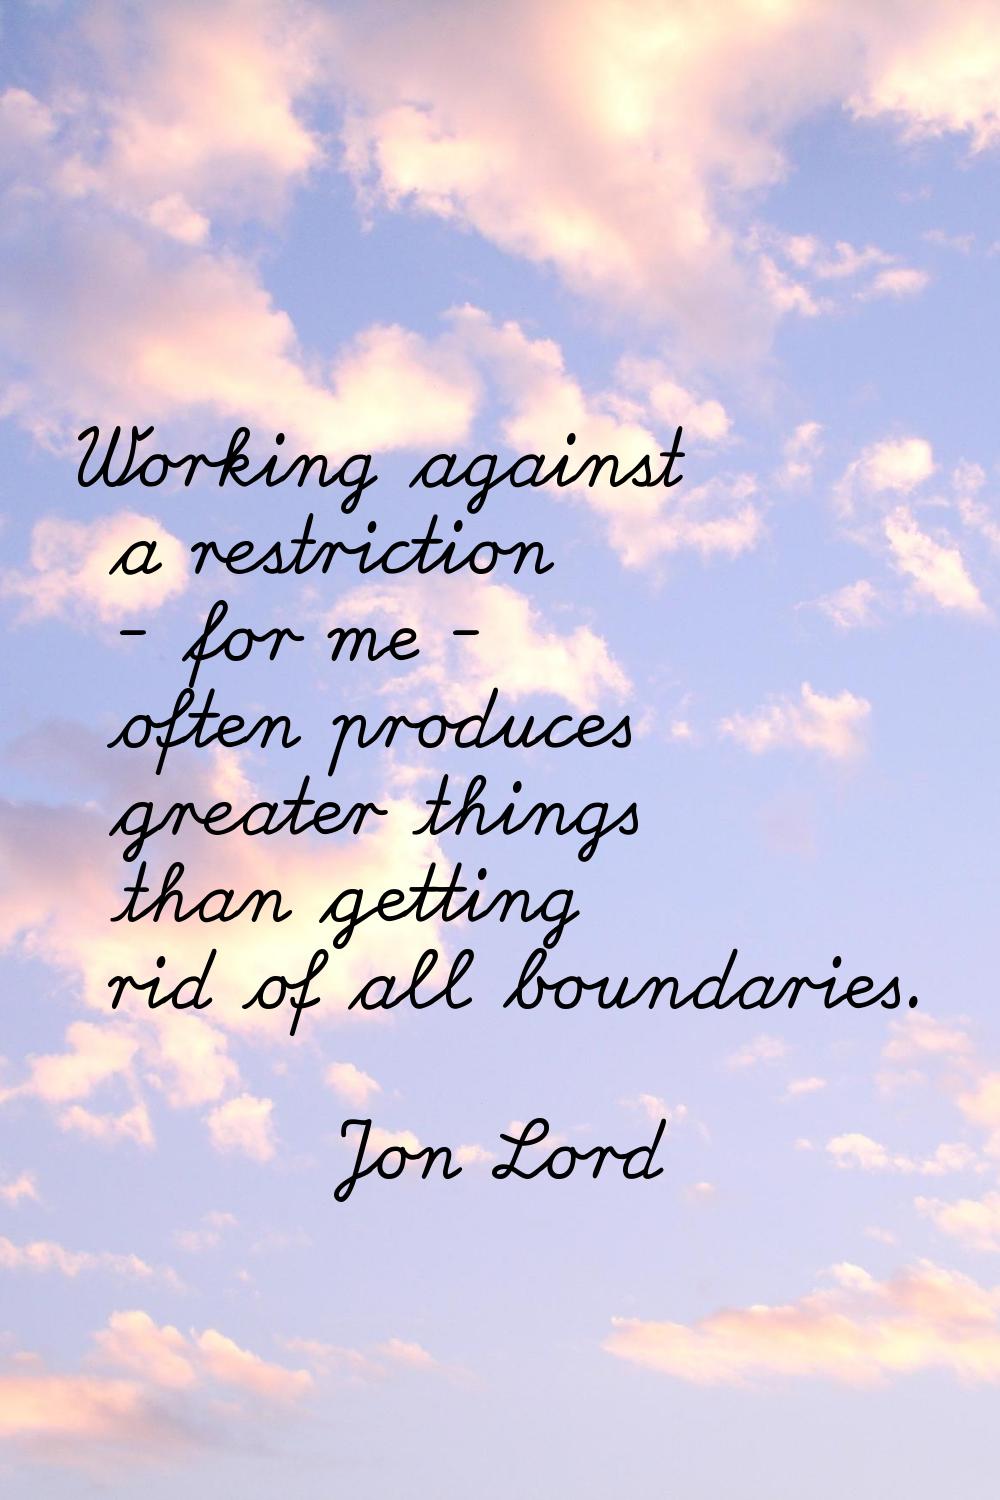 Working against a restriction - for me - often produces greater things than getting rid of all boun